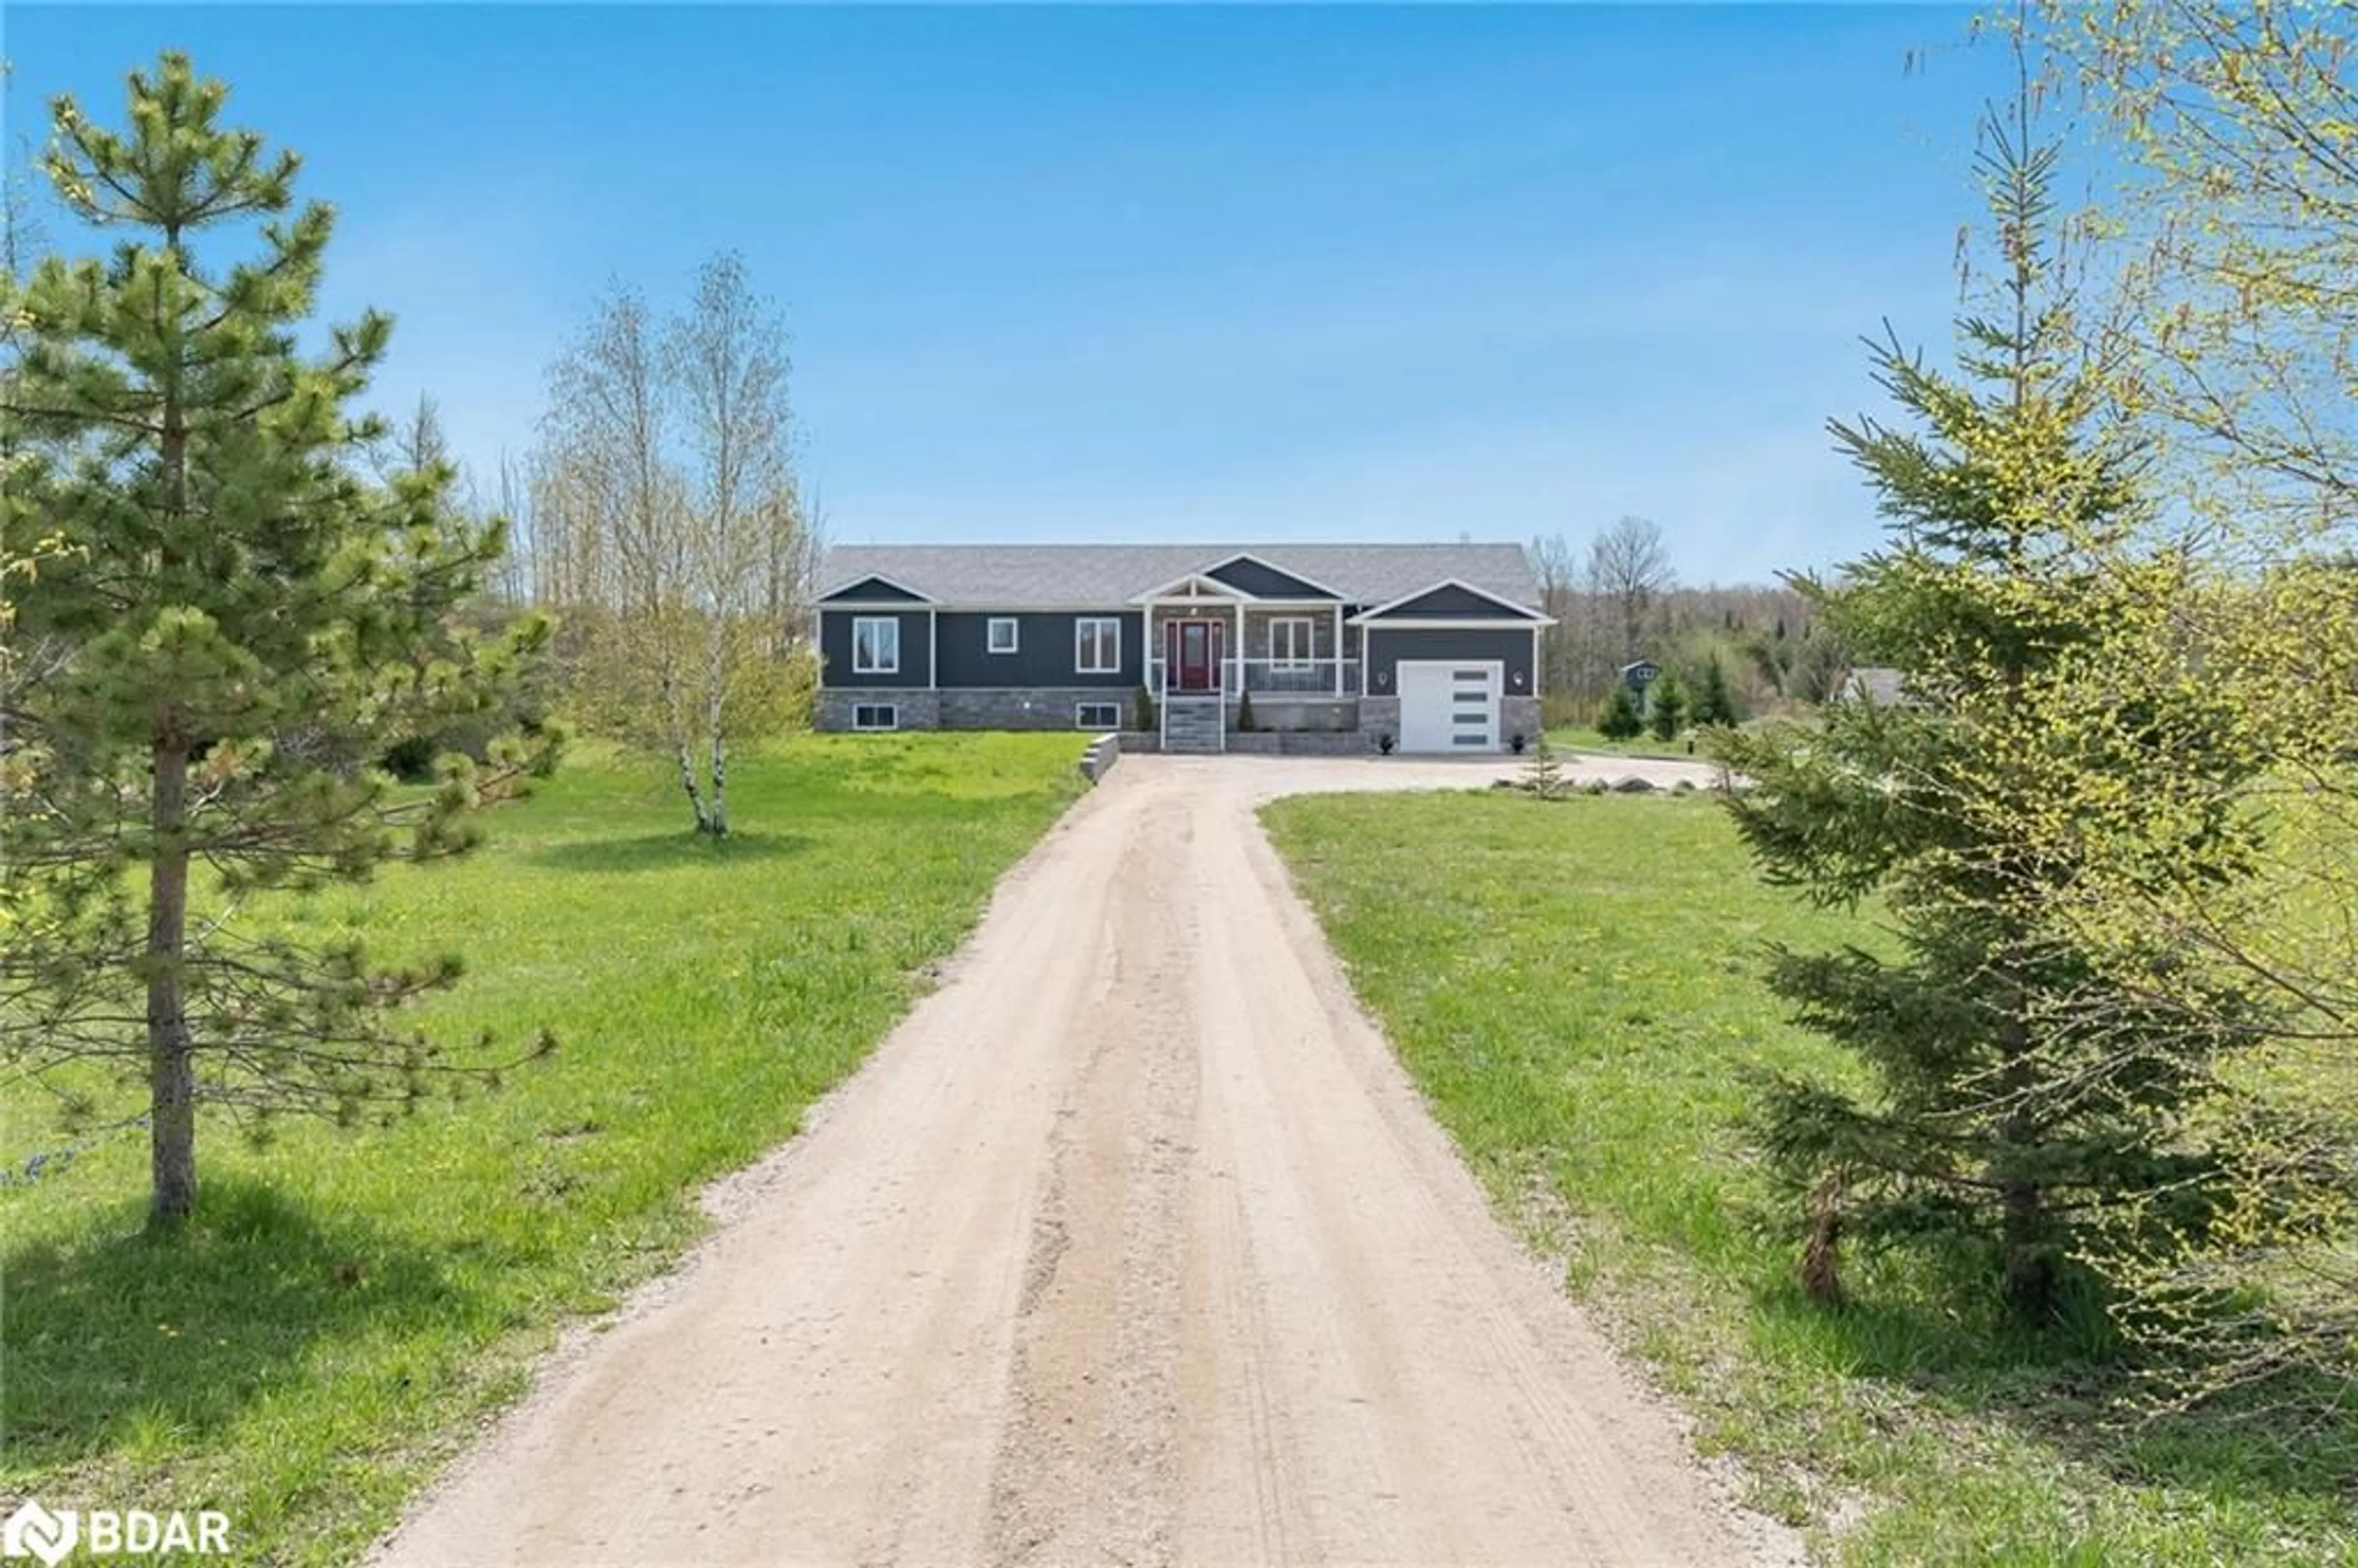 Frontside or backside of a home for 185718 Grey County Road 9, Dundalk Ontario N0C 1B0